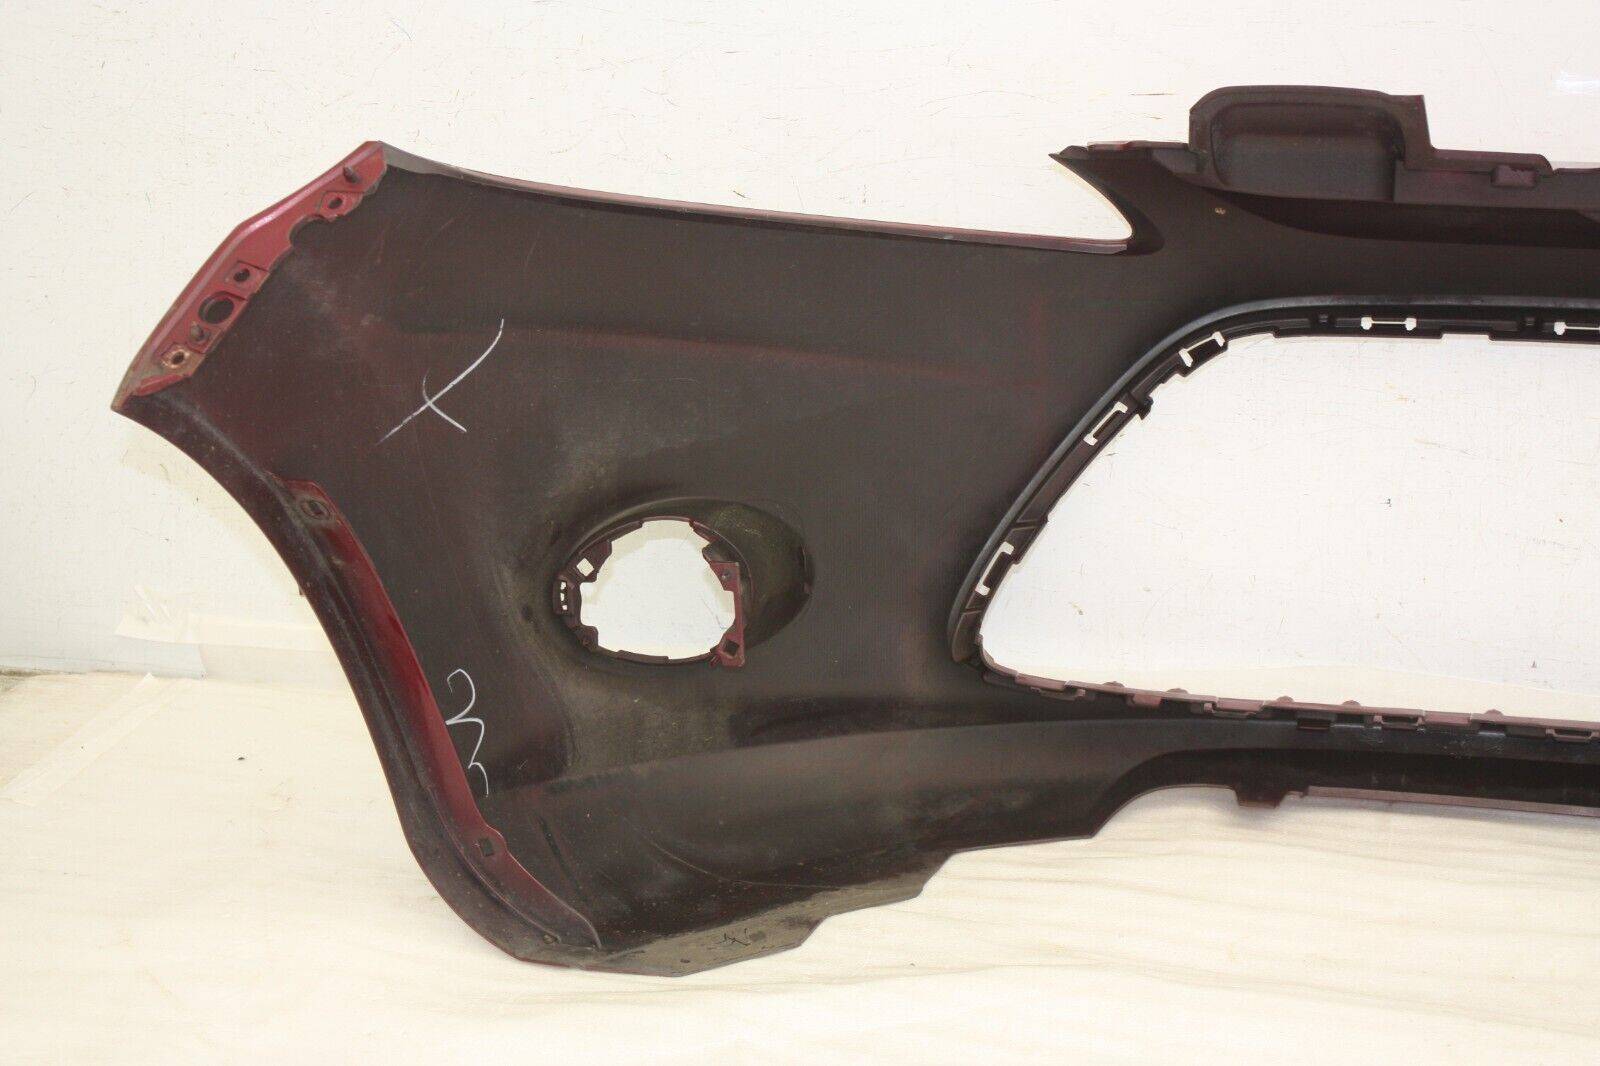 Ford-Fiesta-Front-Bumper-2008-TO-2012-8A61-17K819-Genuine-DAMAGED-176298722588-16